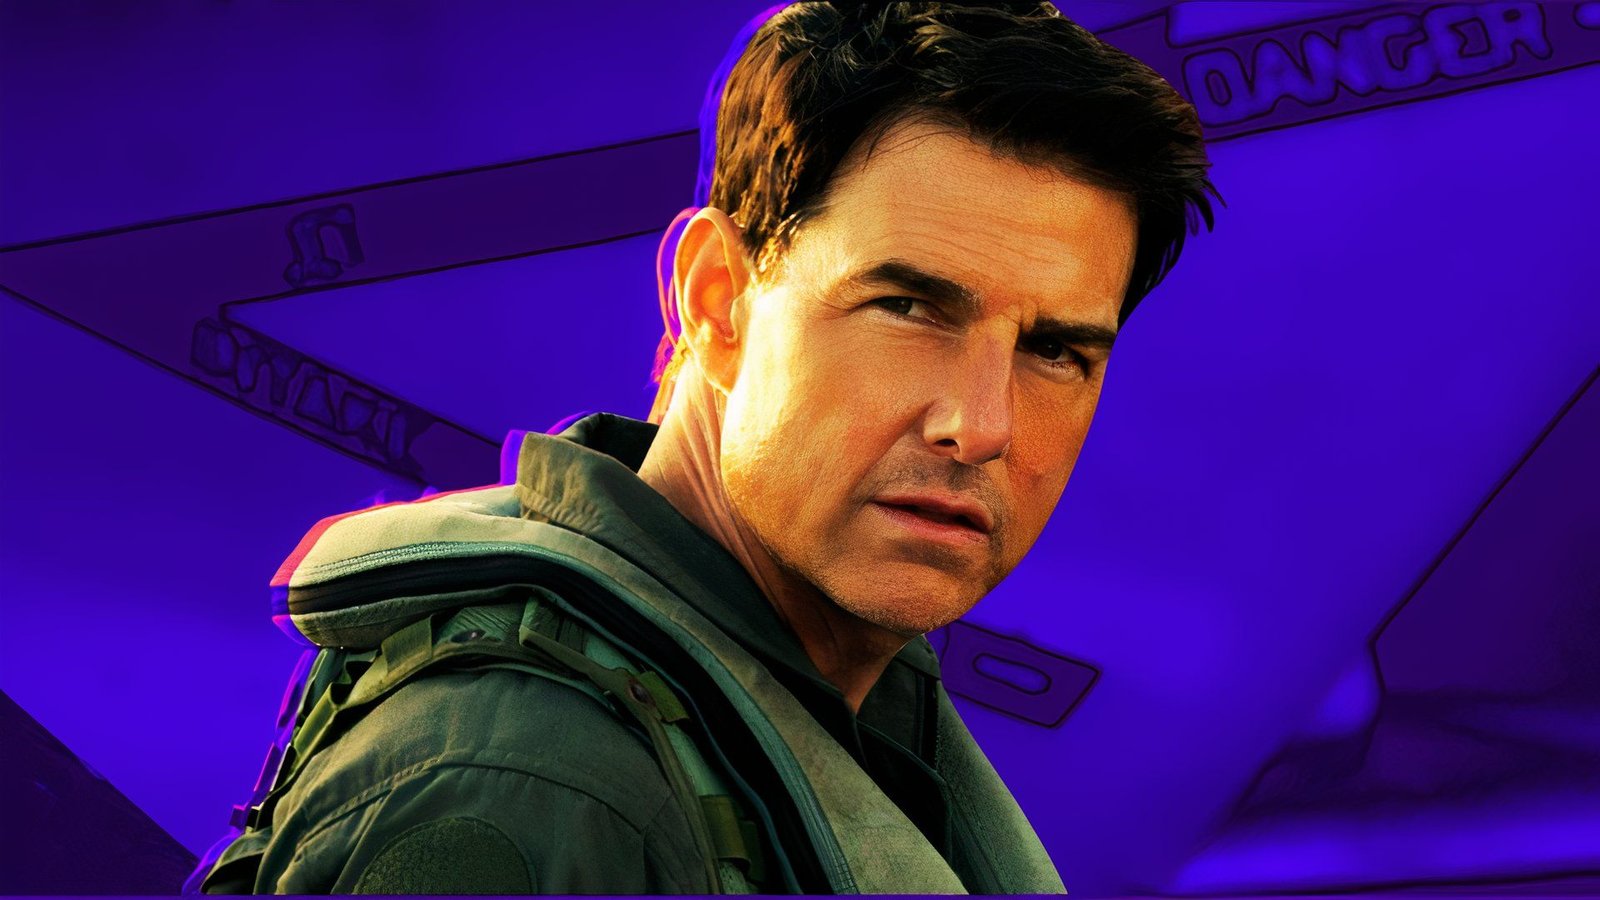 Top Gun 3 Takes Shape with Early Talks Involving Tom Cruise, Jerry Bruckheimer Confirms